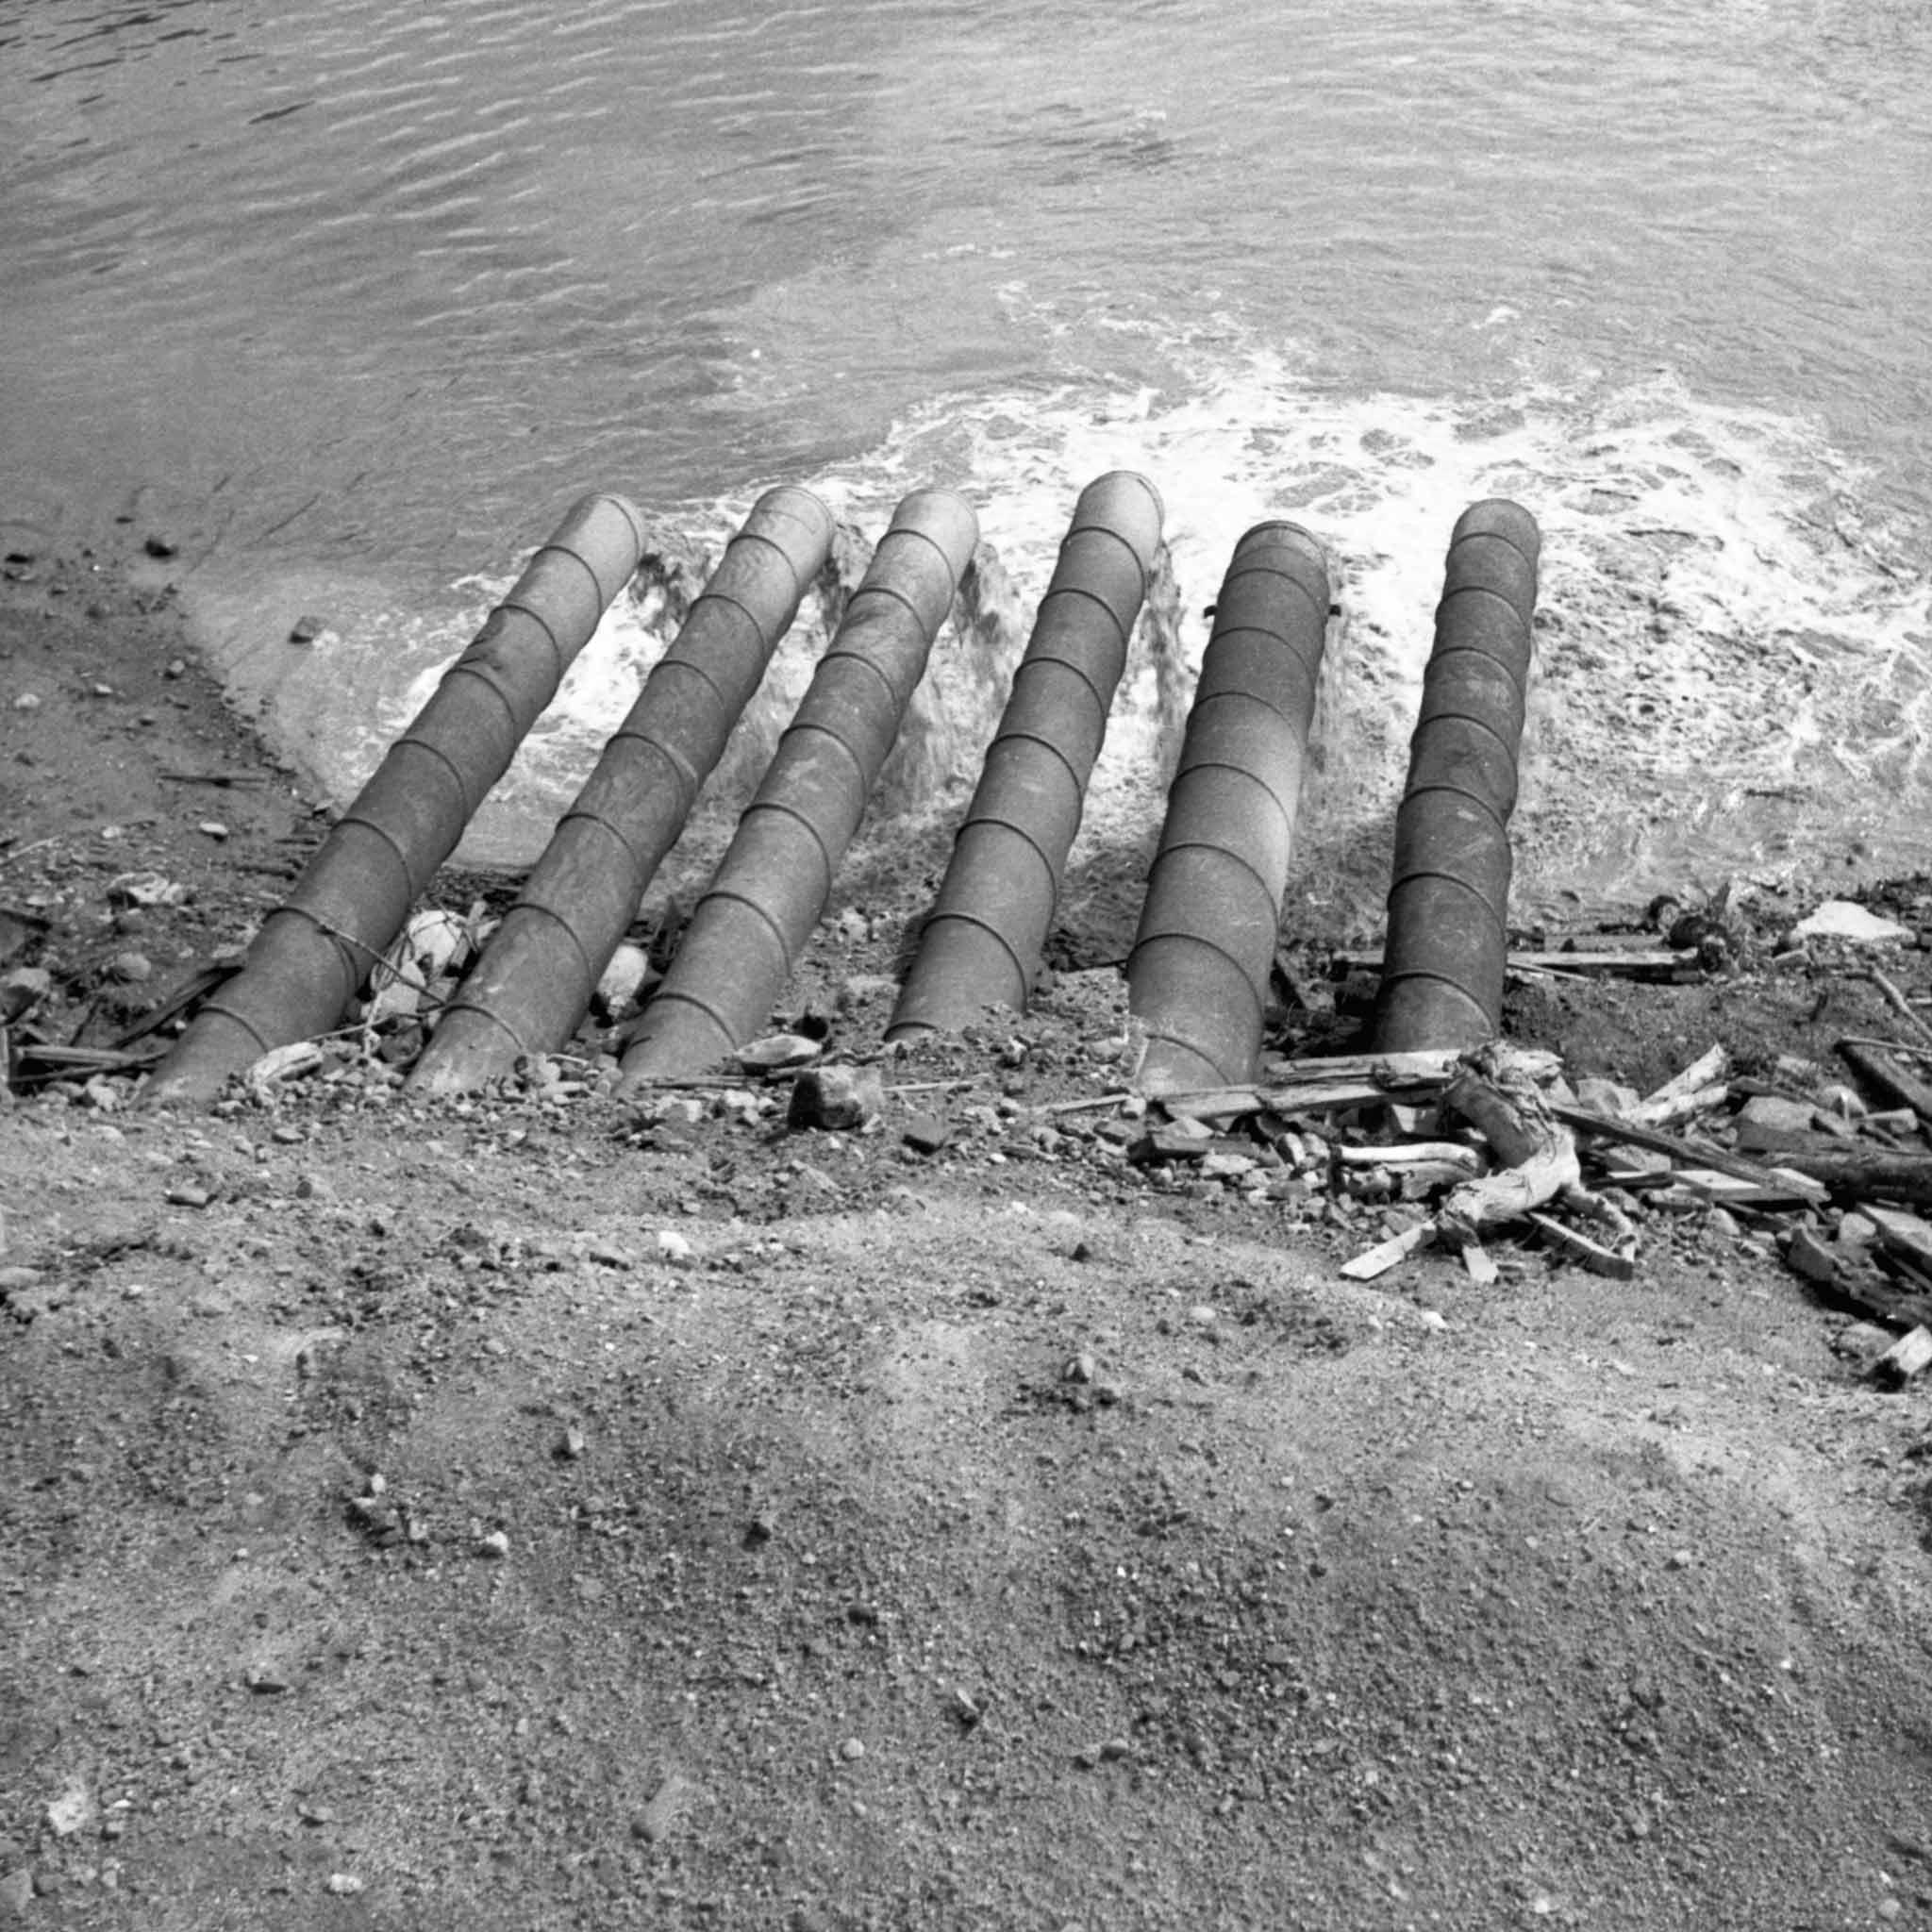 black and white image of six metal tubes jutting out of an earthen bank dumping water into a body of water. top down view